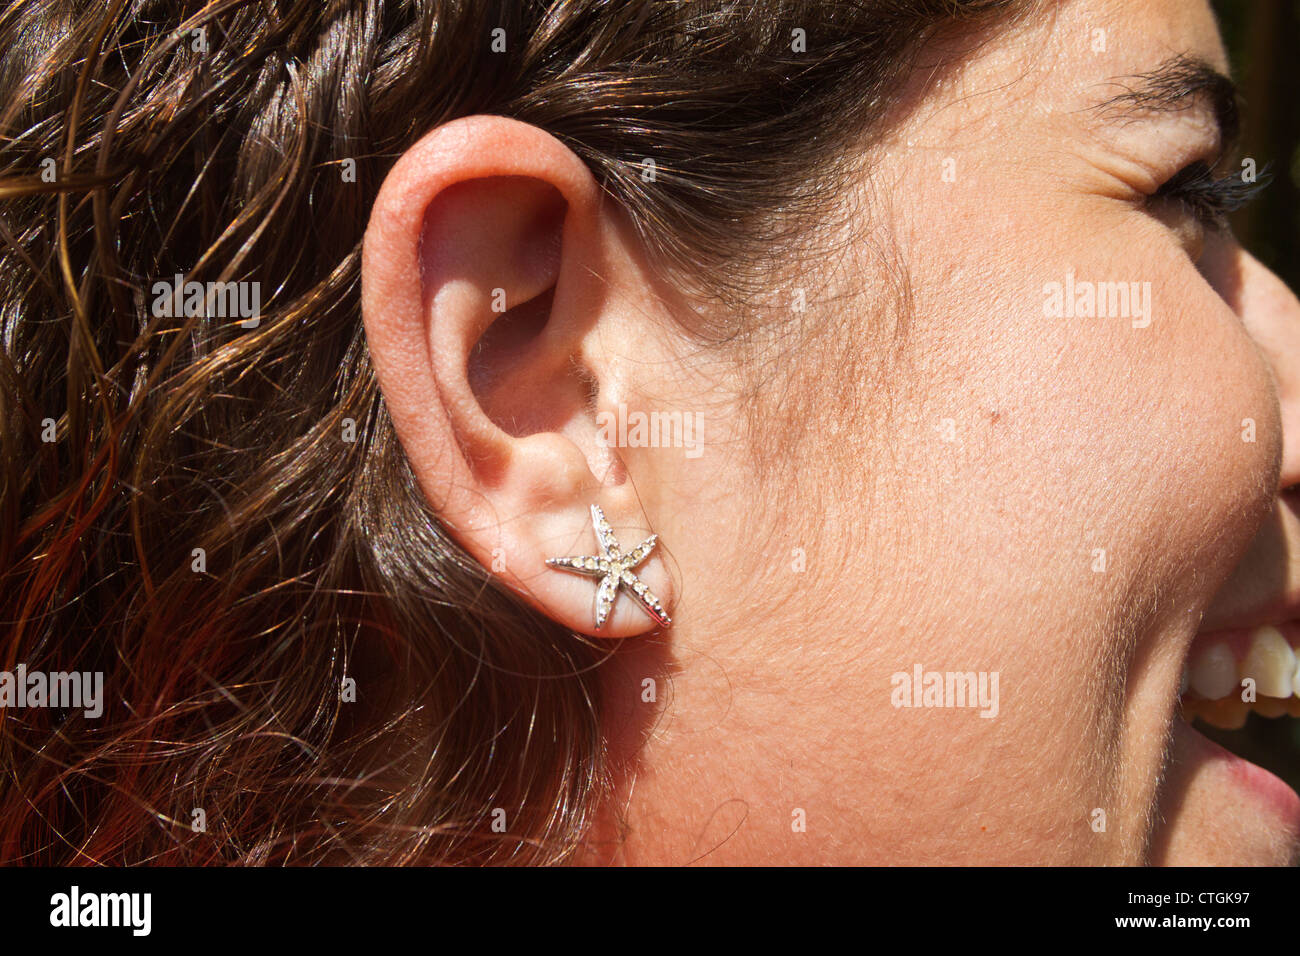 Star shaped earring on smiling young woman's ear. Stock Photo